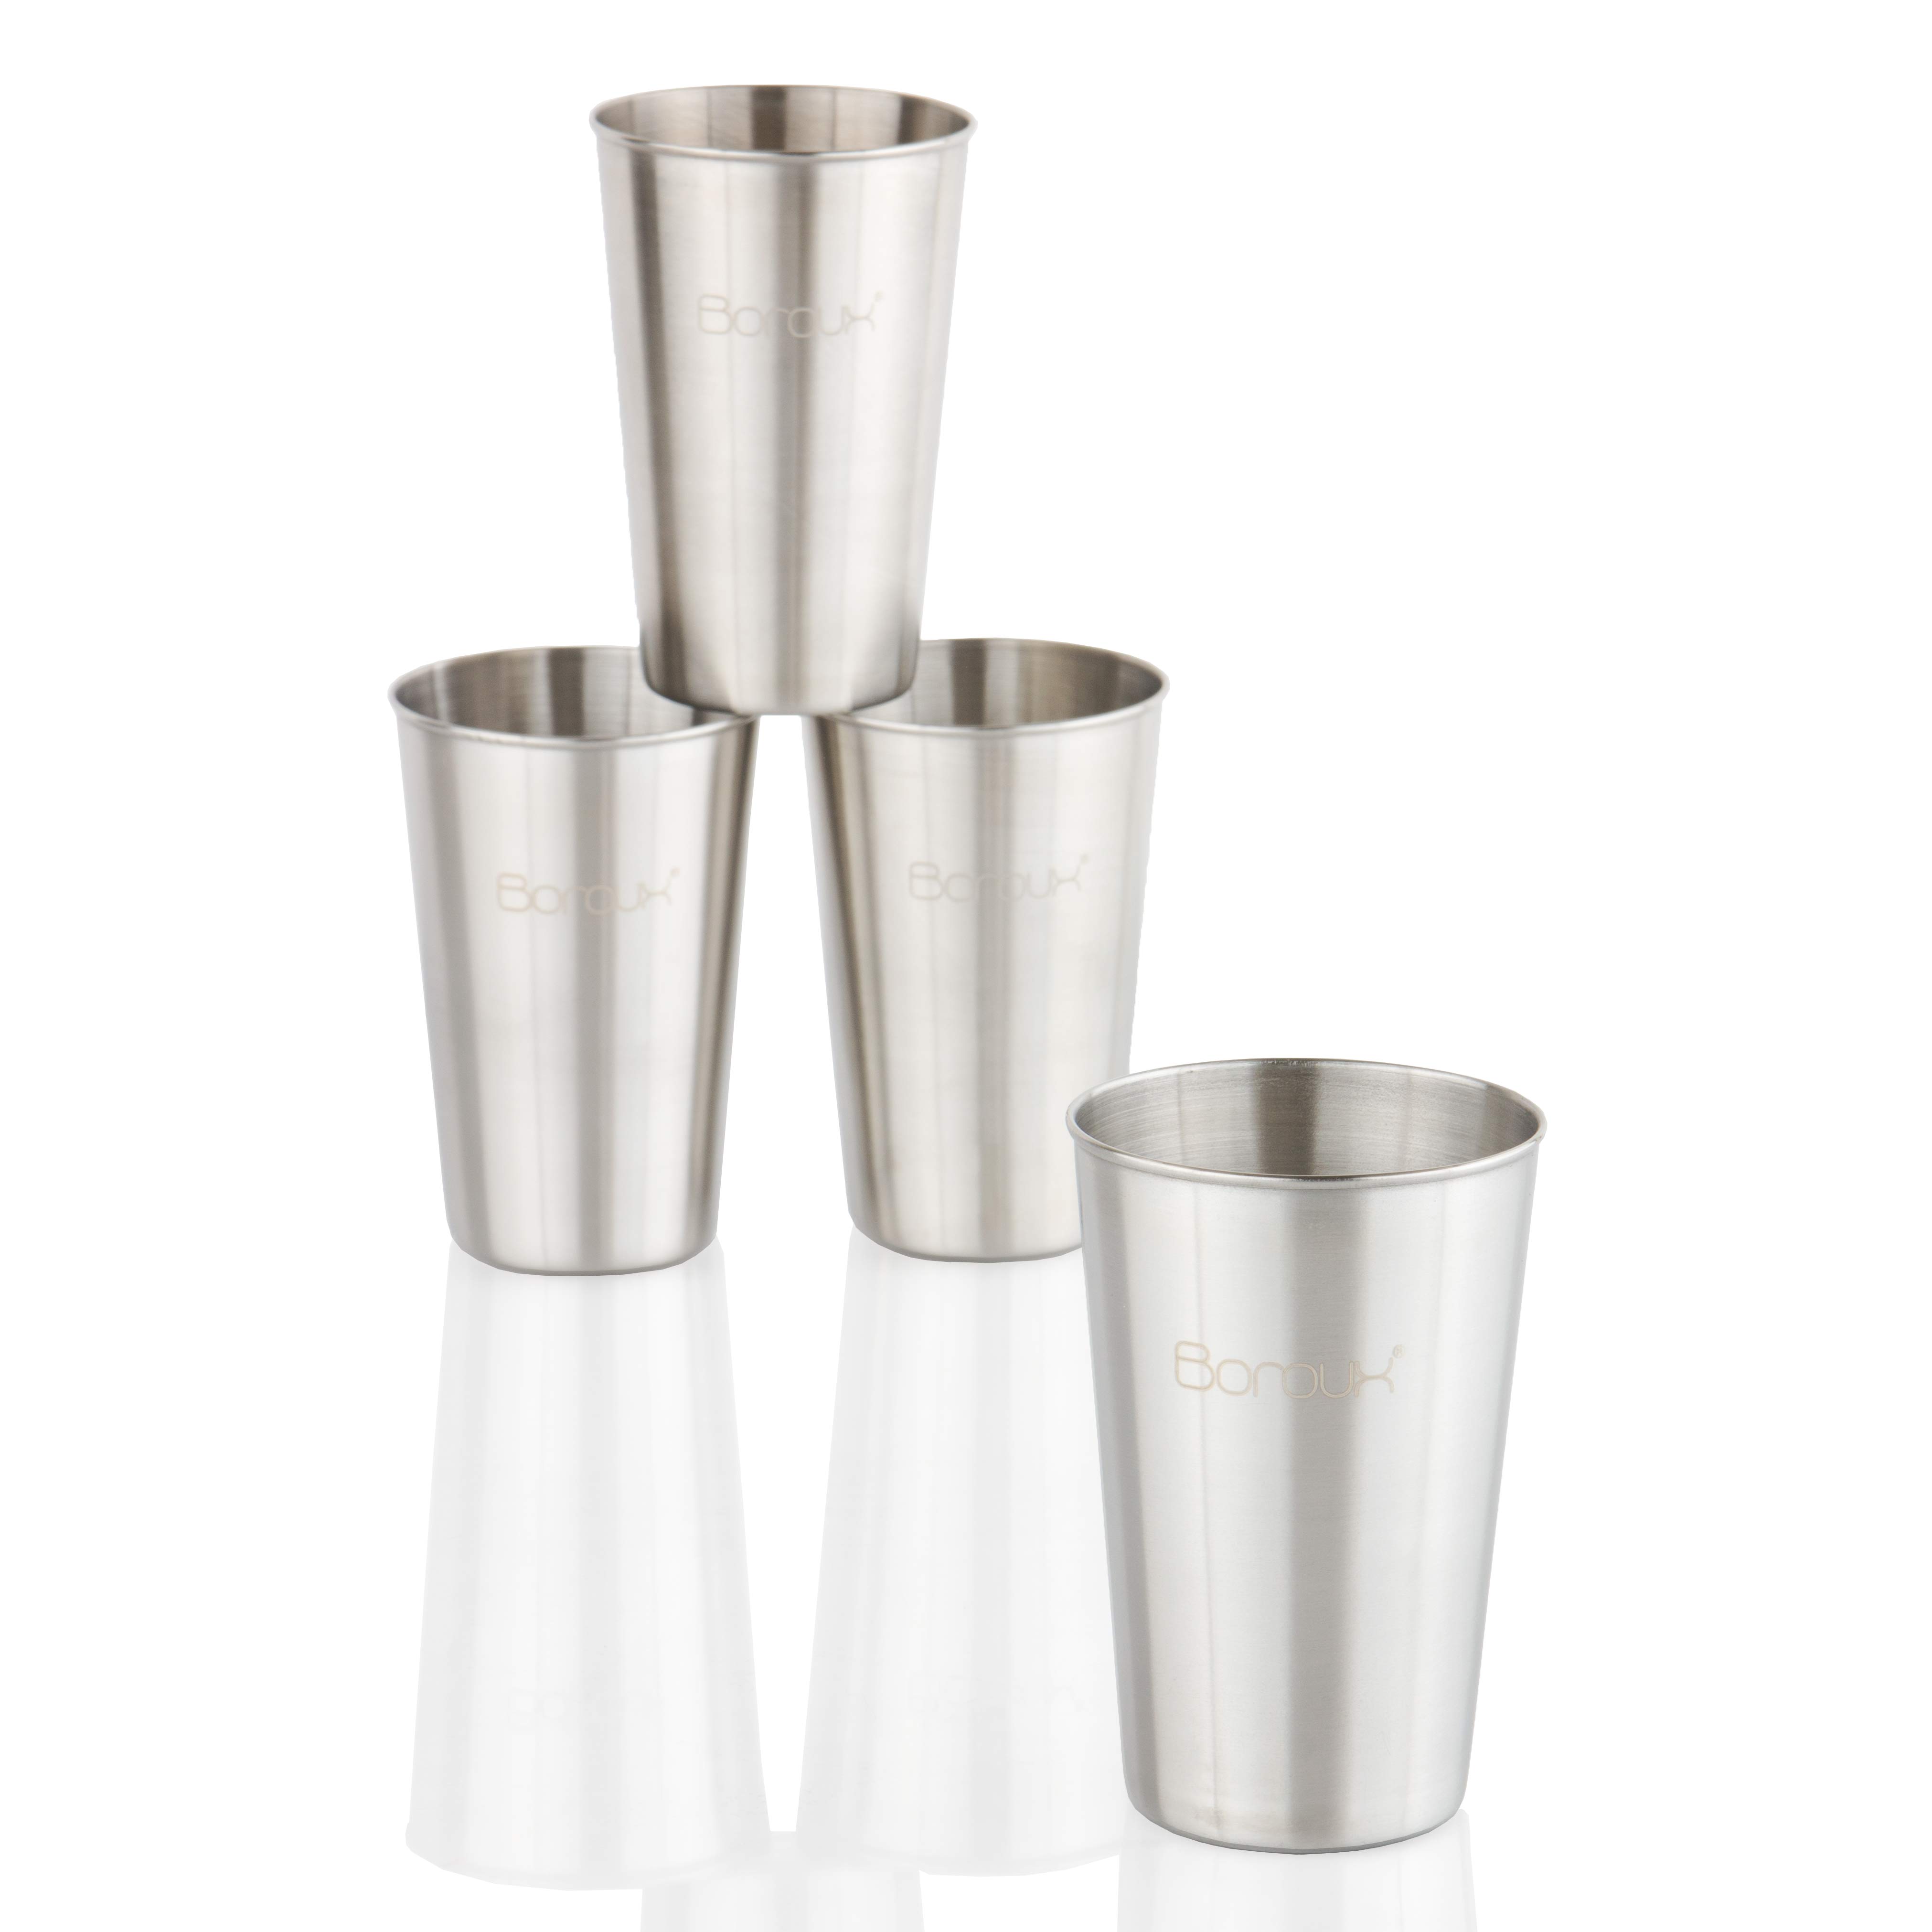 12 oz. Stainless Steel Cups (Set of 4) - Boroux | Modern Glass Water ...